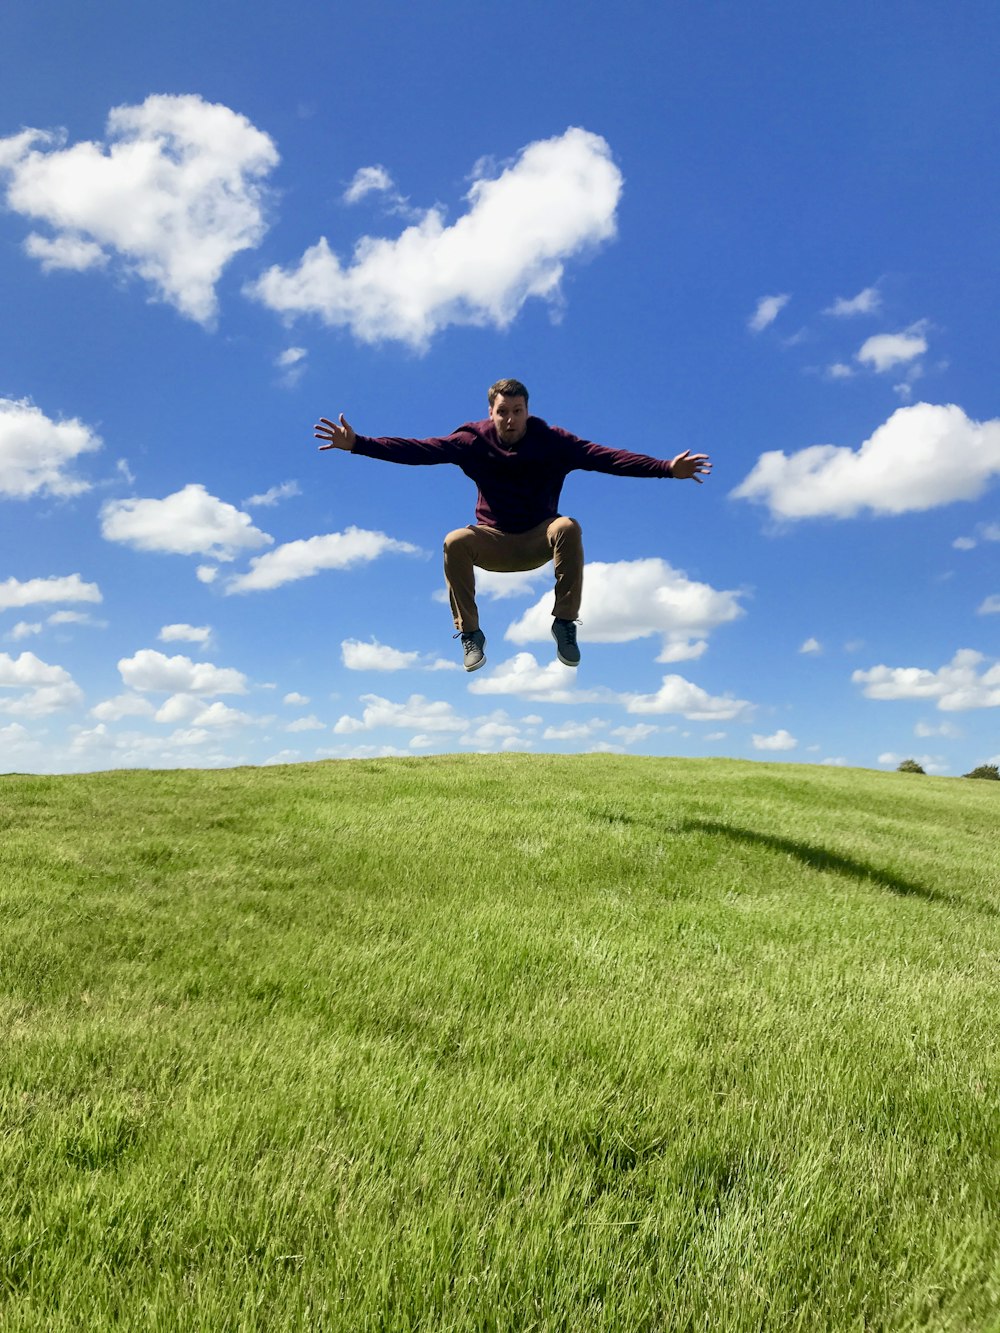 a man is jumping in the air on a grassy hill